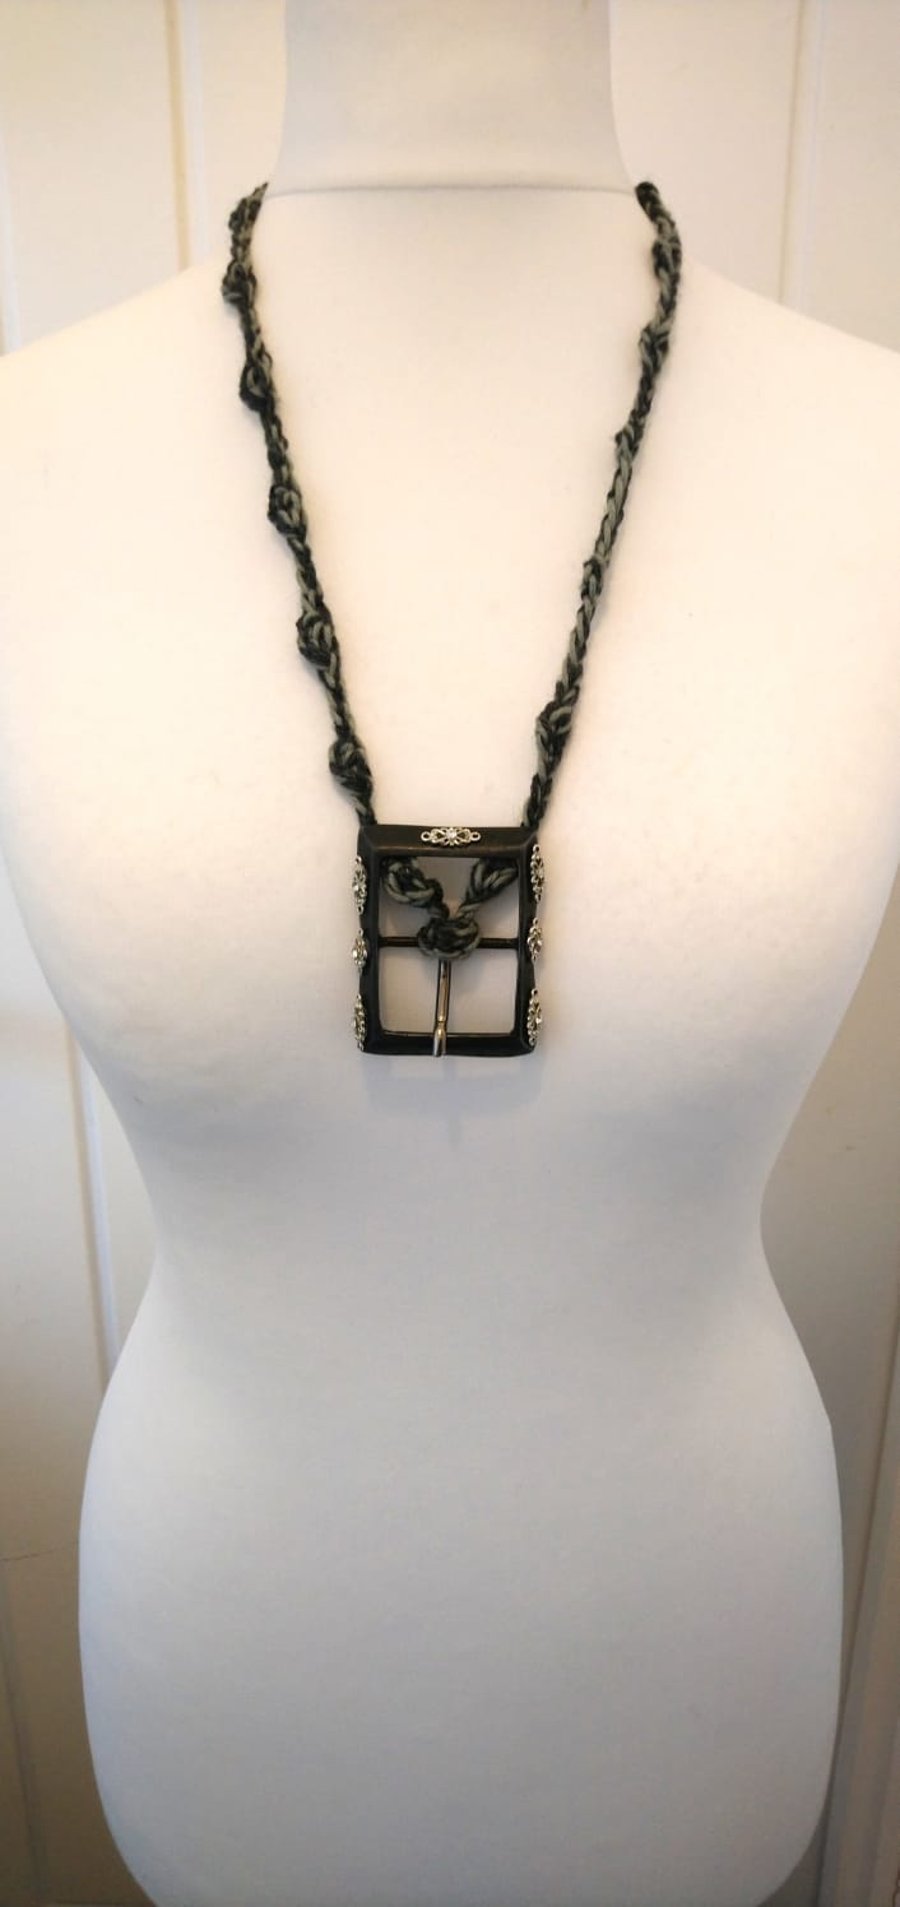 Recycled Metal Buckle Crochet Necklace